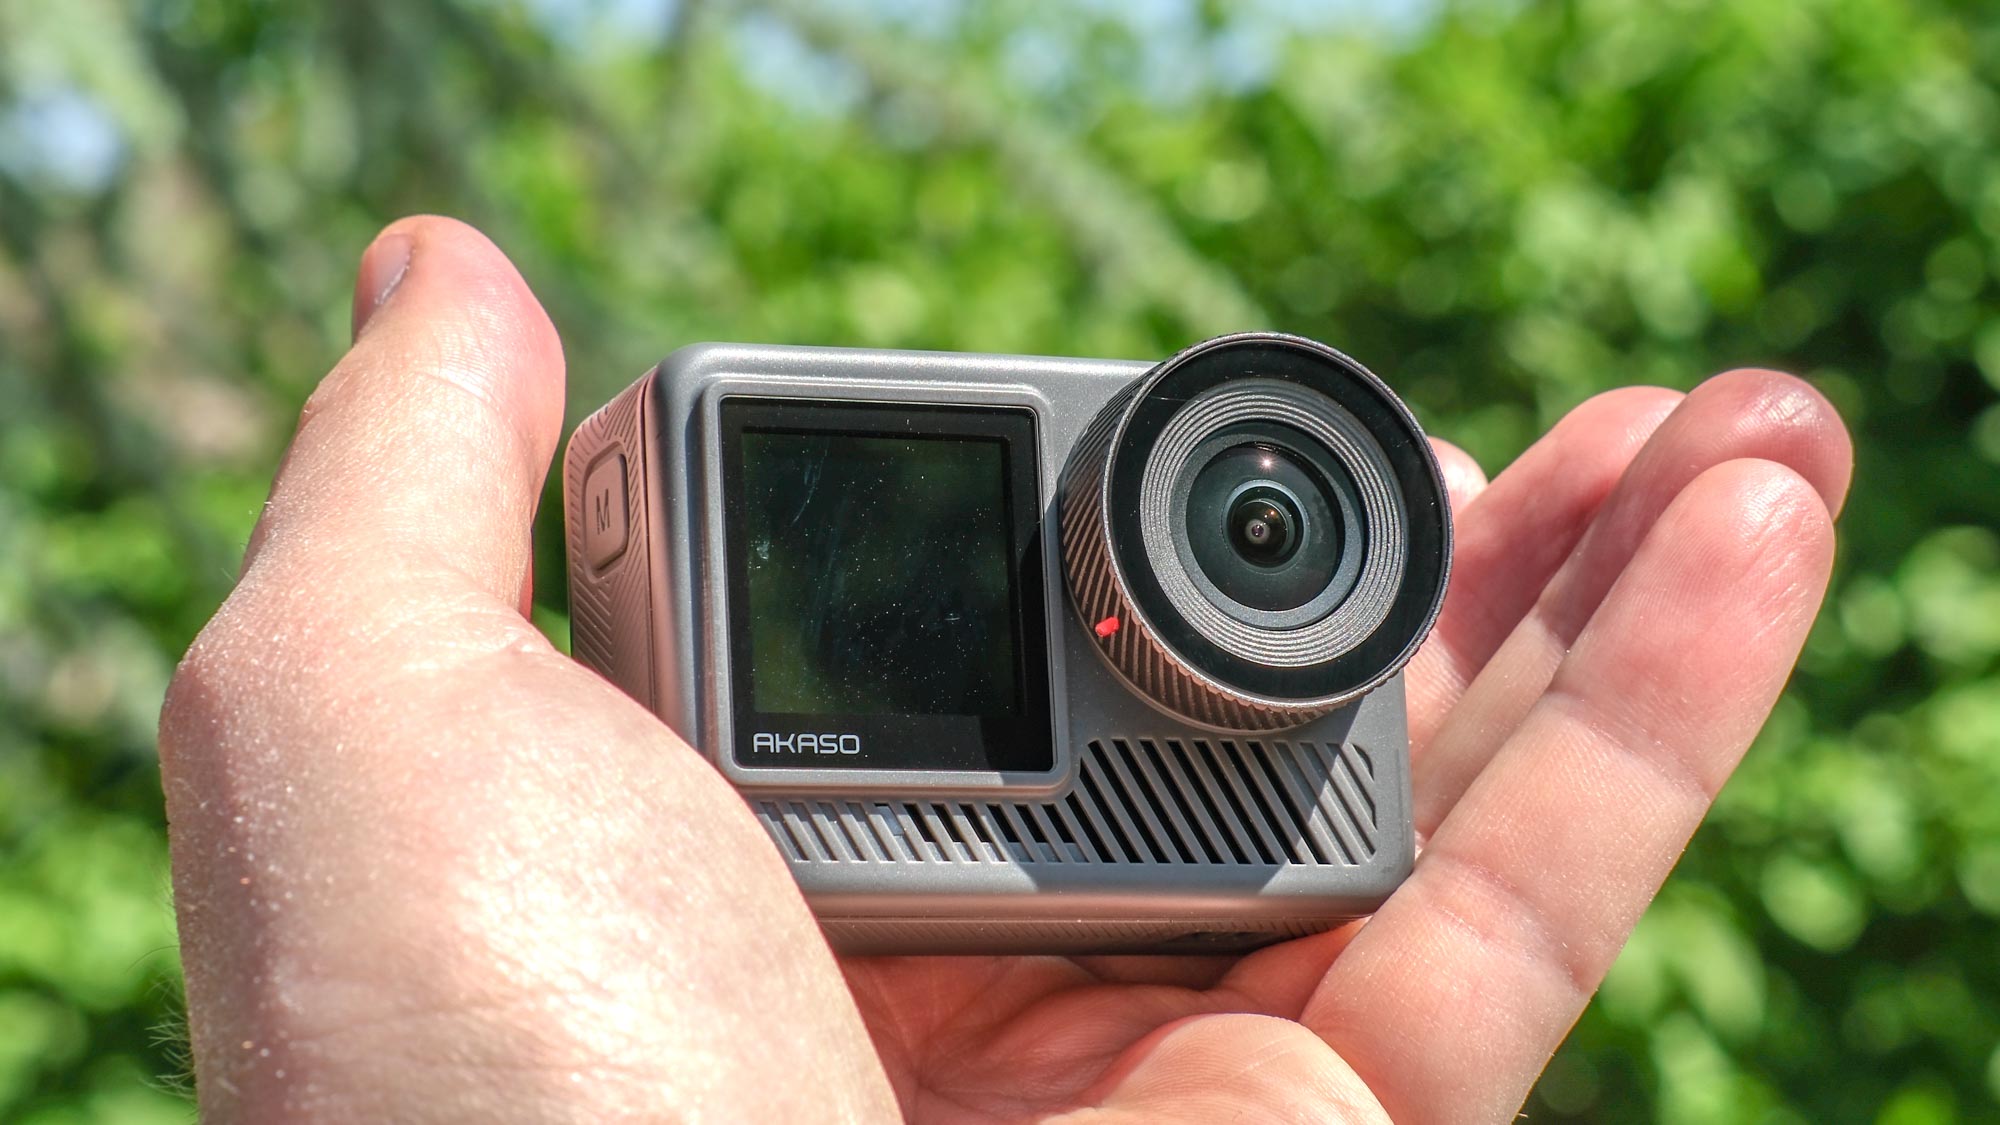 A photo of the Akaso Brave 8 Lite in hand against a green, out of focus background.